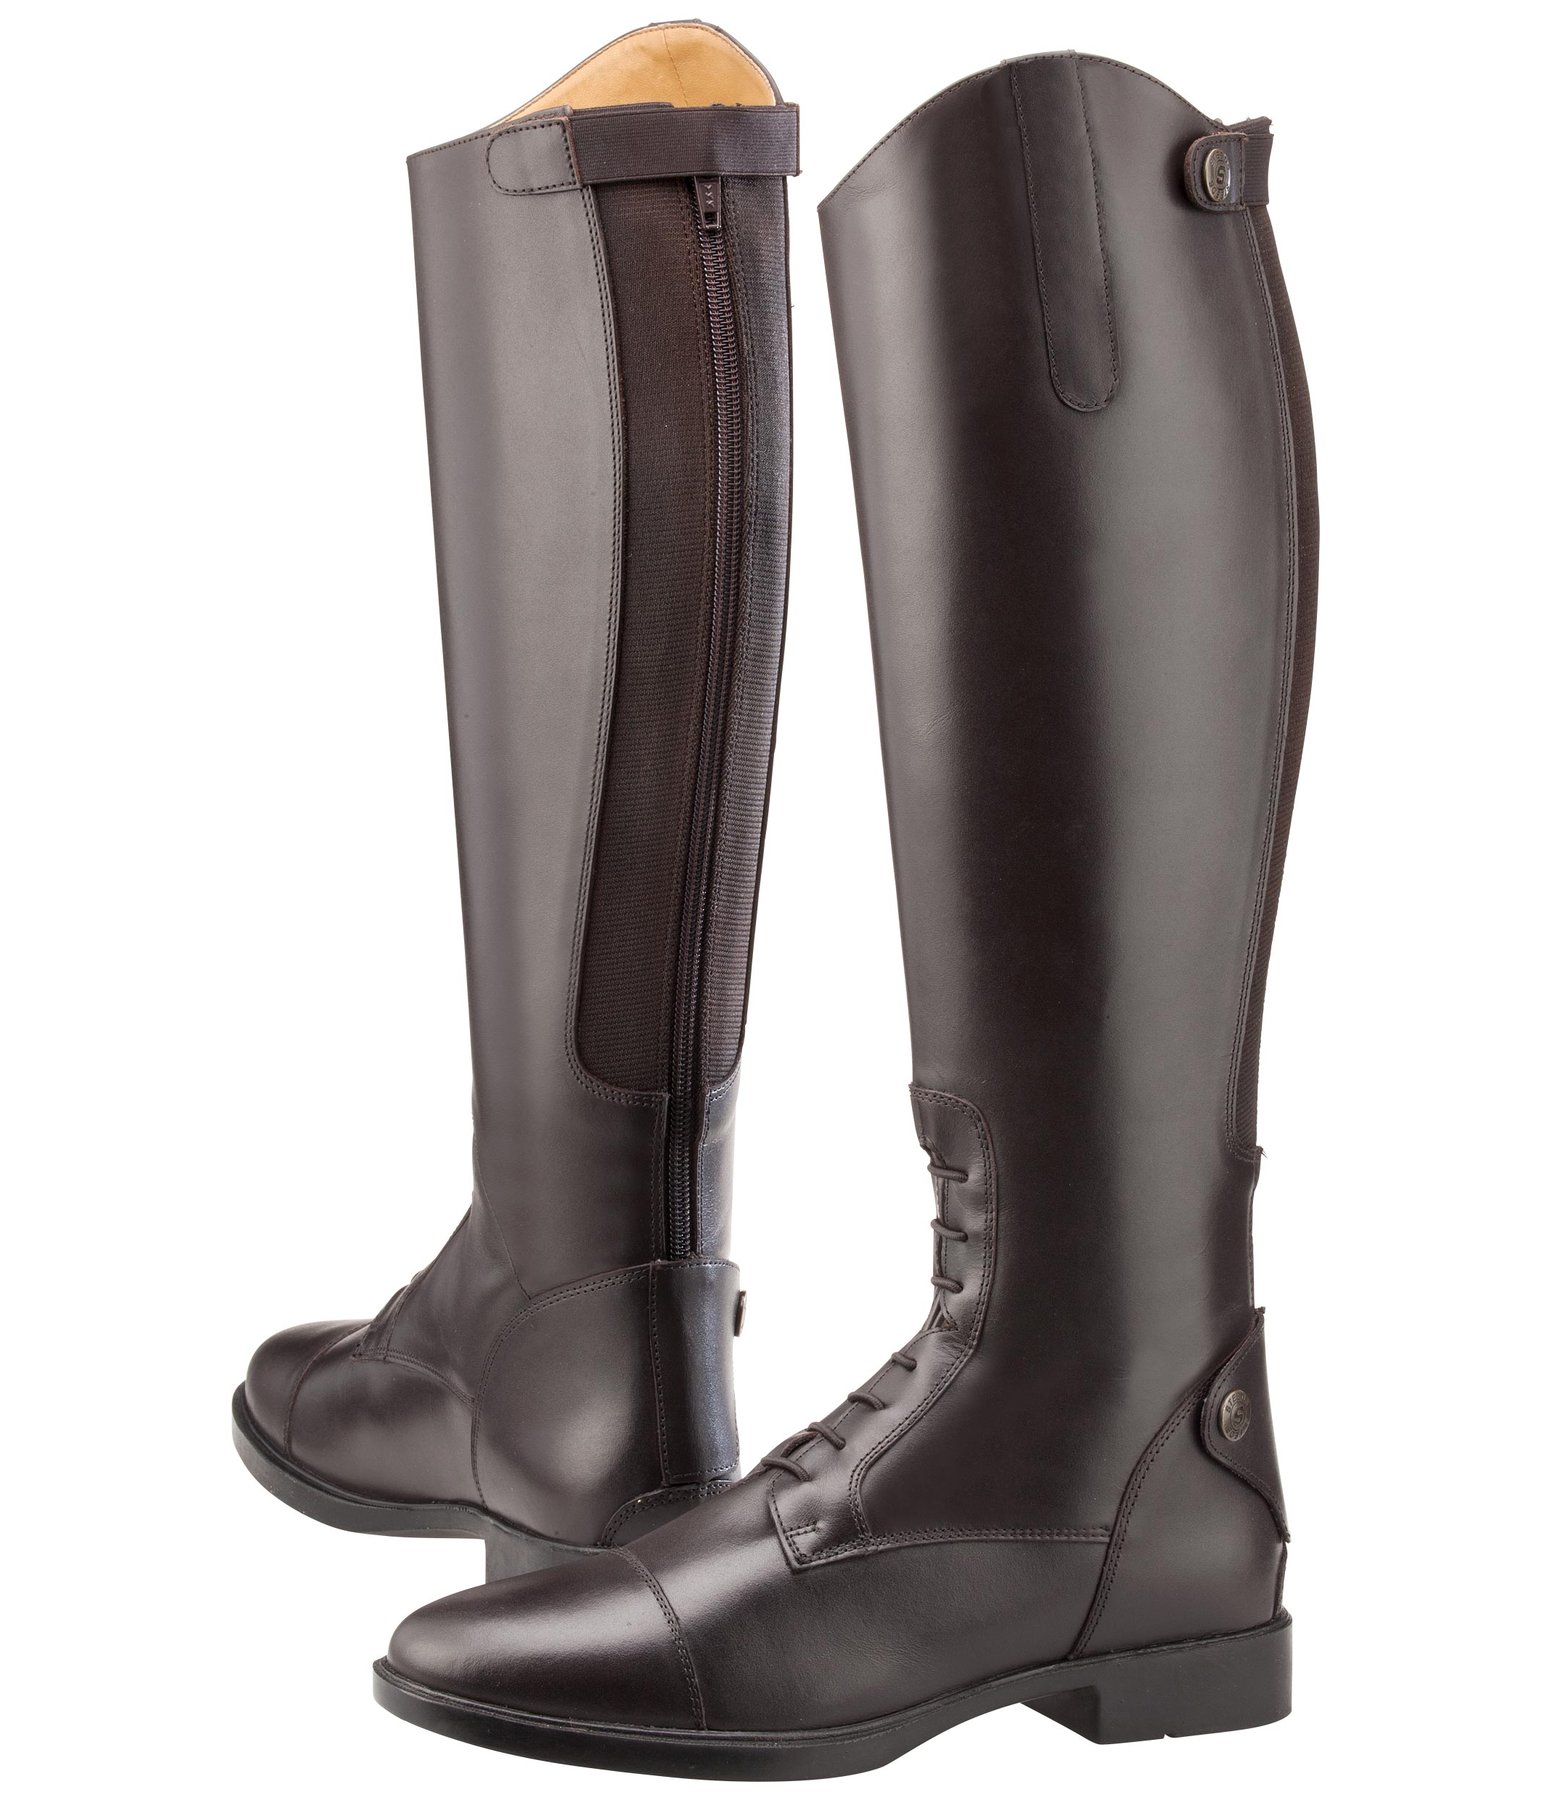 Leather Riding Boots - Kramer Equestrian